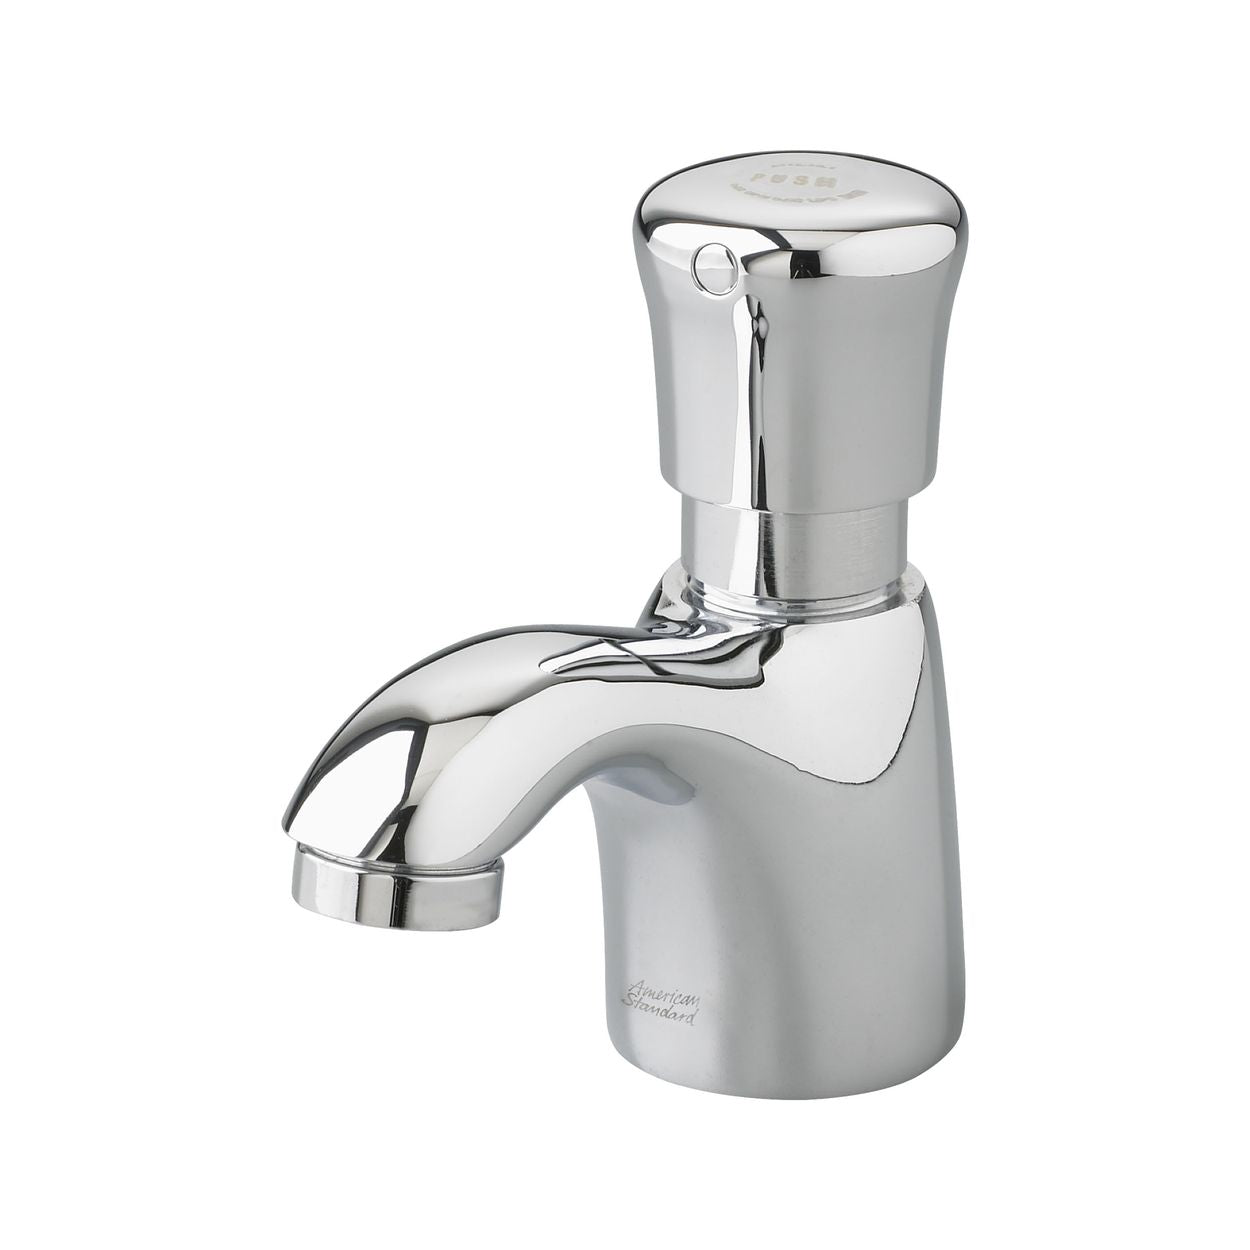 1340109.002 - Metering Pillar Tap Faucet with Extended Spout - 1.0 GPM